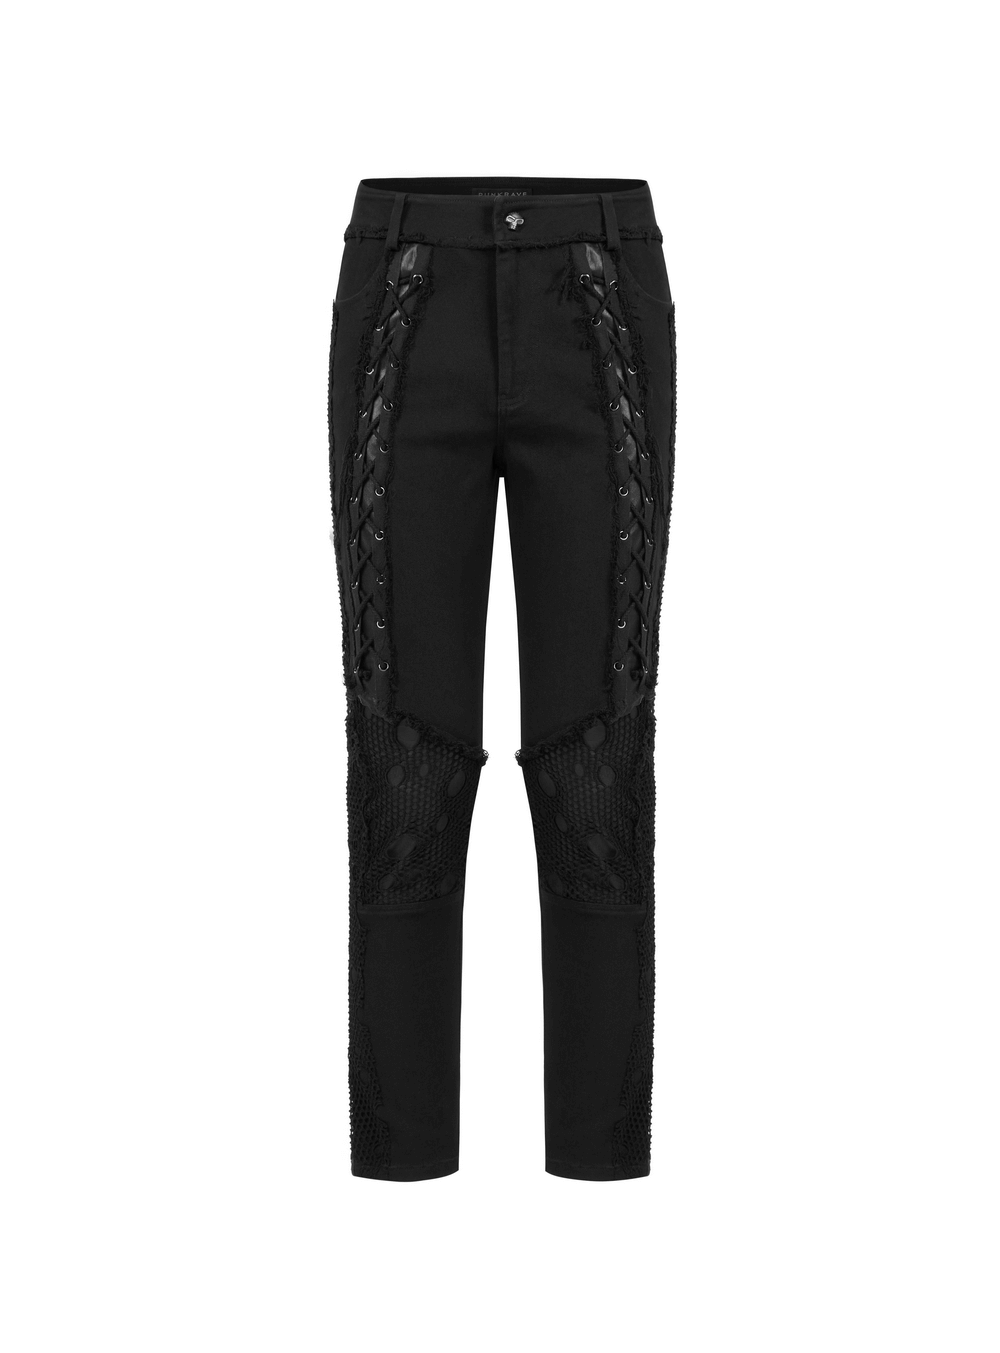 Edgy Black Mesh Panel Lace-Up Gothic Punk Trousers